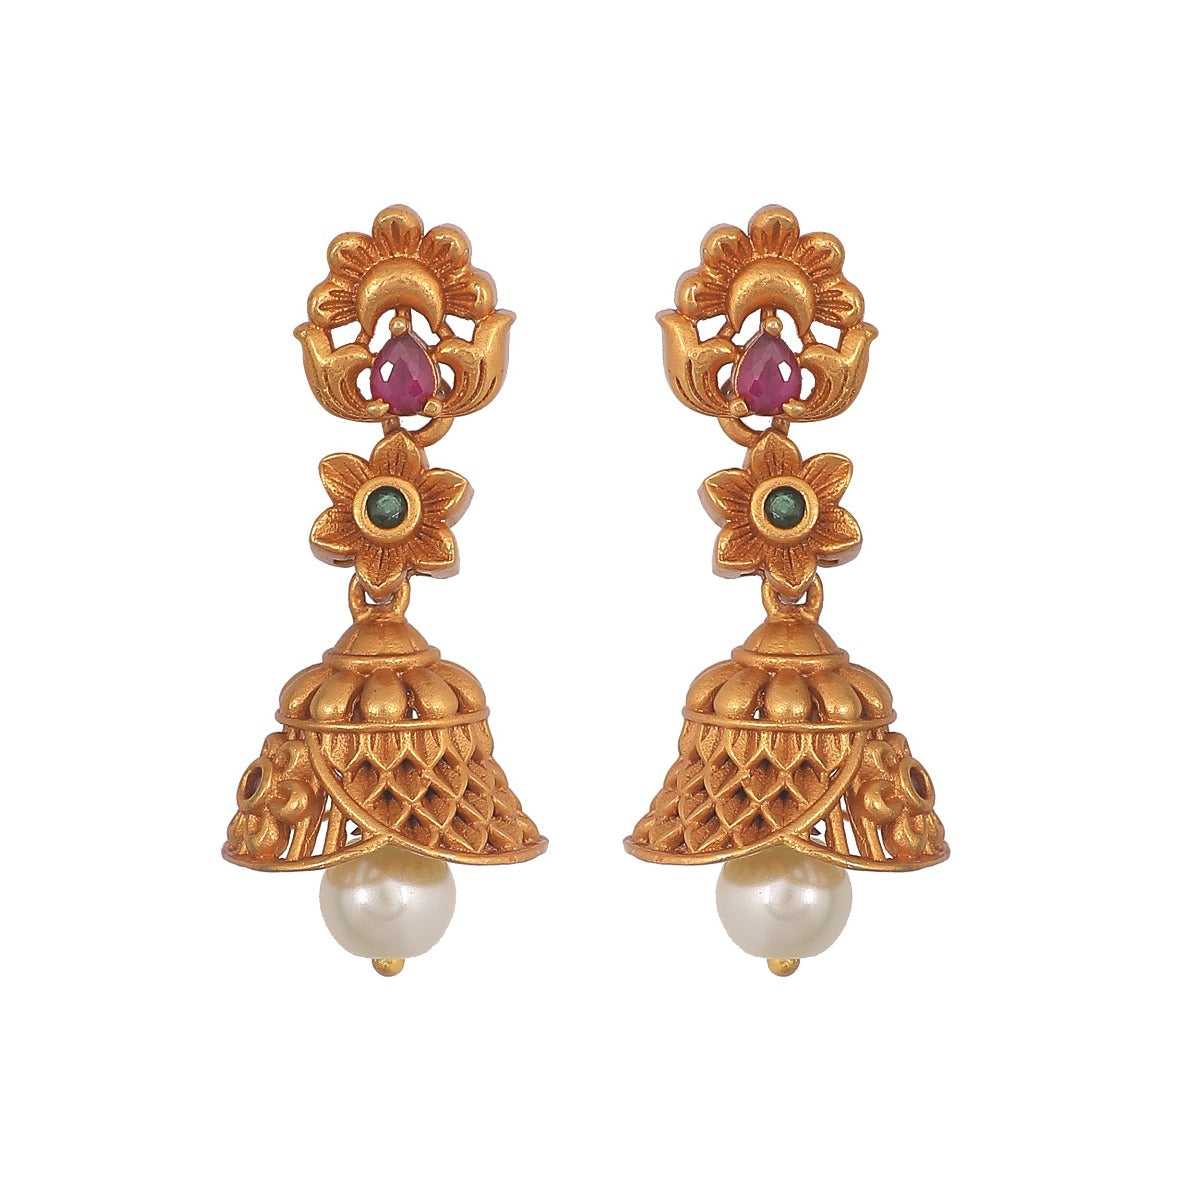 Antique gold nakshi earrings - Indian Jewellery Designs